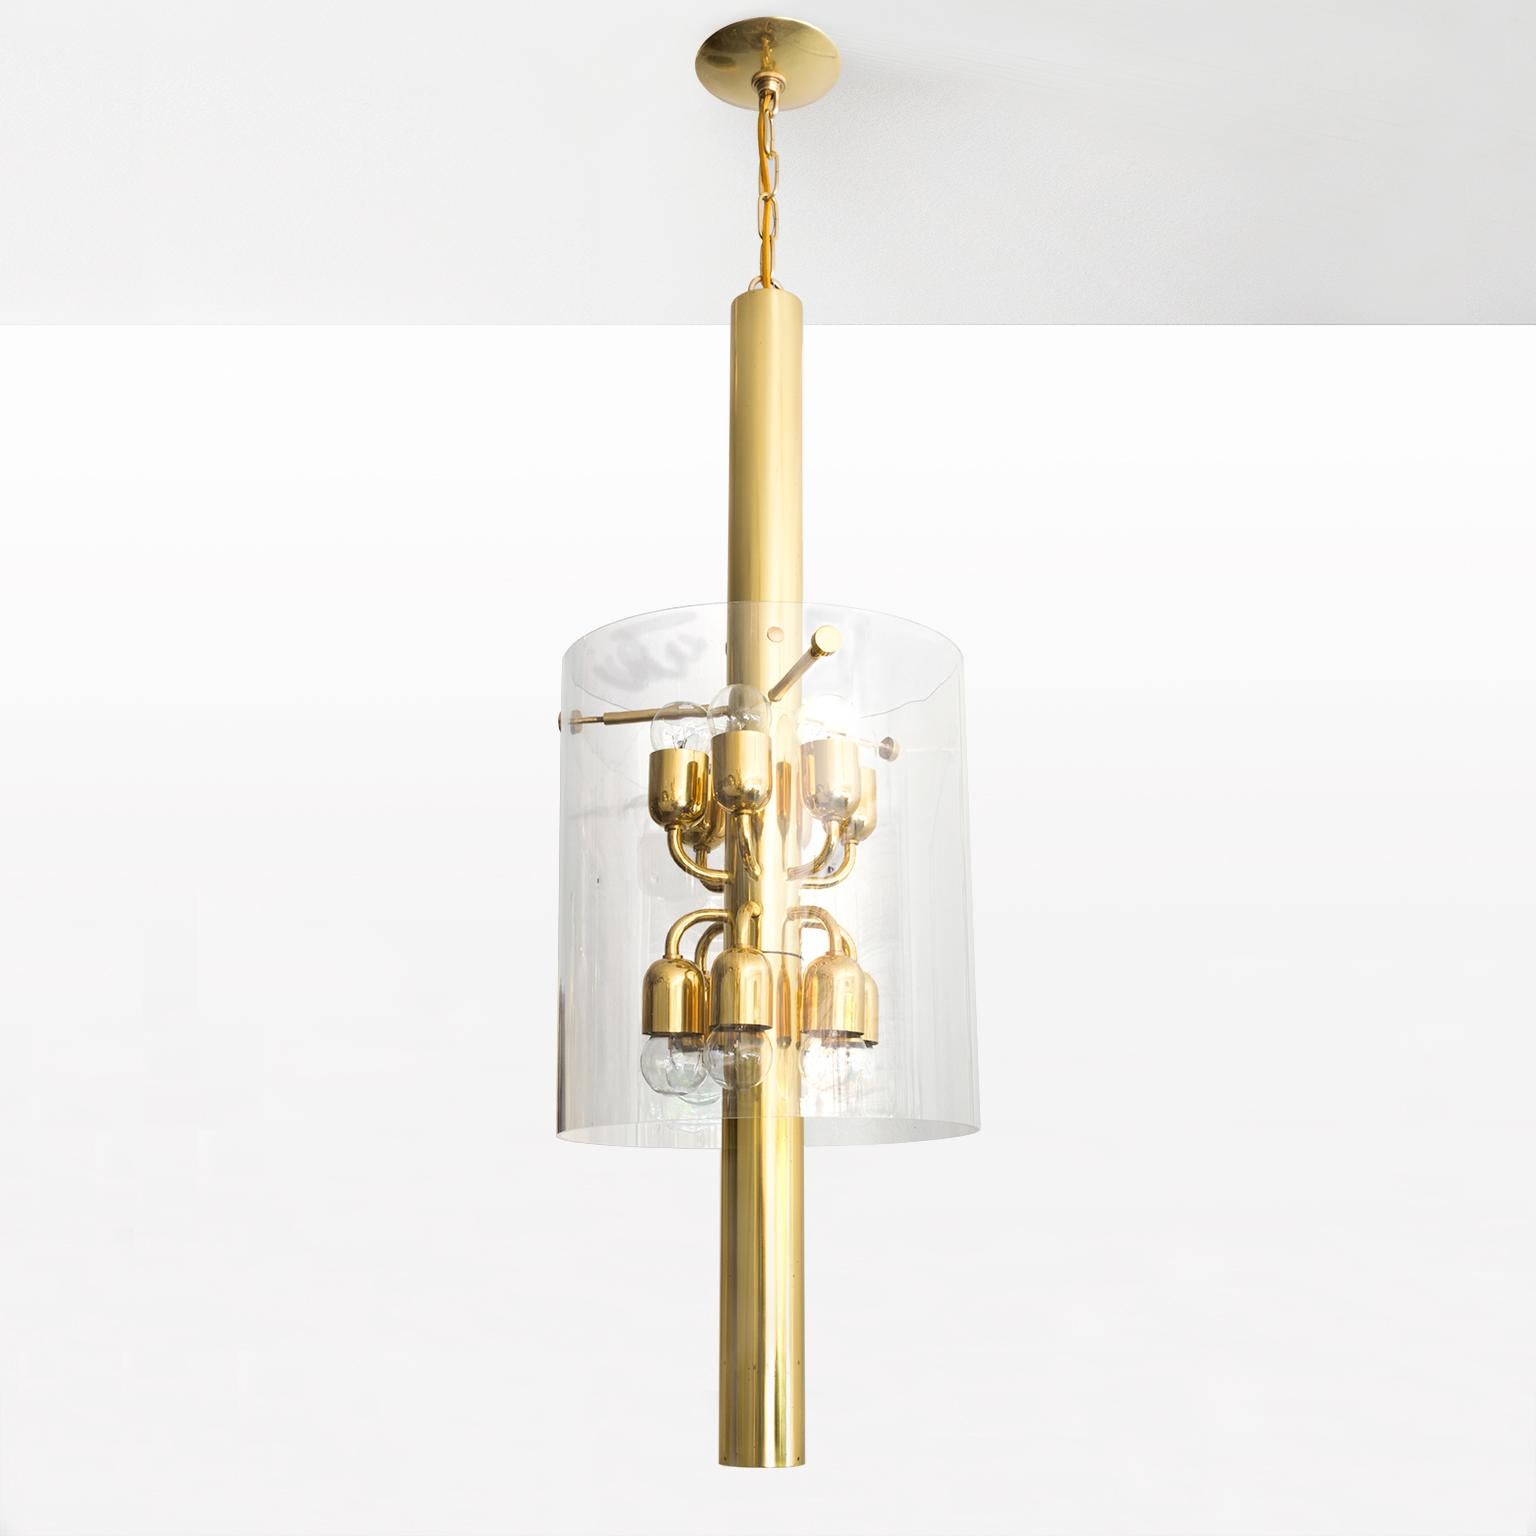 Scandinavian Modern chandelier by Hans-Agne Jakobsson designed for AB in Markaryd, polished brass pendant with 12 arms on a tubular form. A clear 14